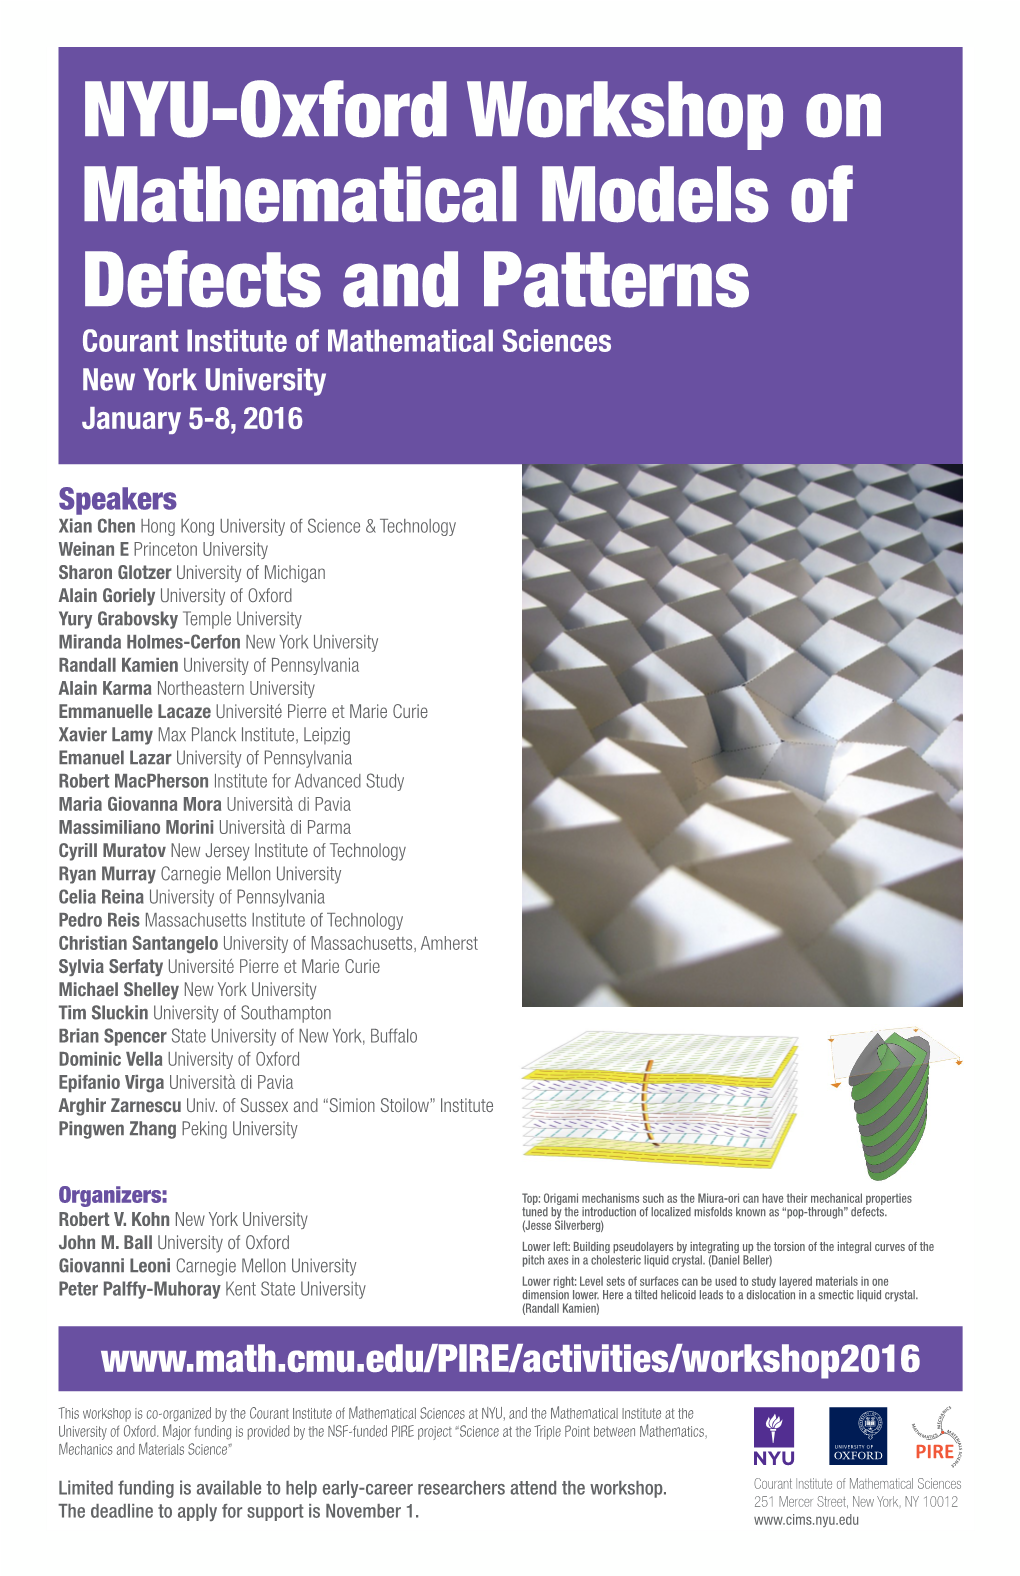 NYU-Oxford Workshop on Mathematical Models of Defects and Patterns Courant Institute of Mathematical Sciences New York University January 5-8, 2016